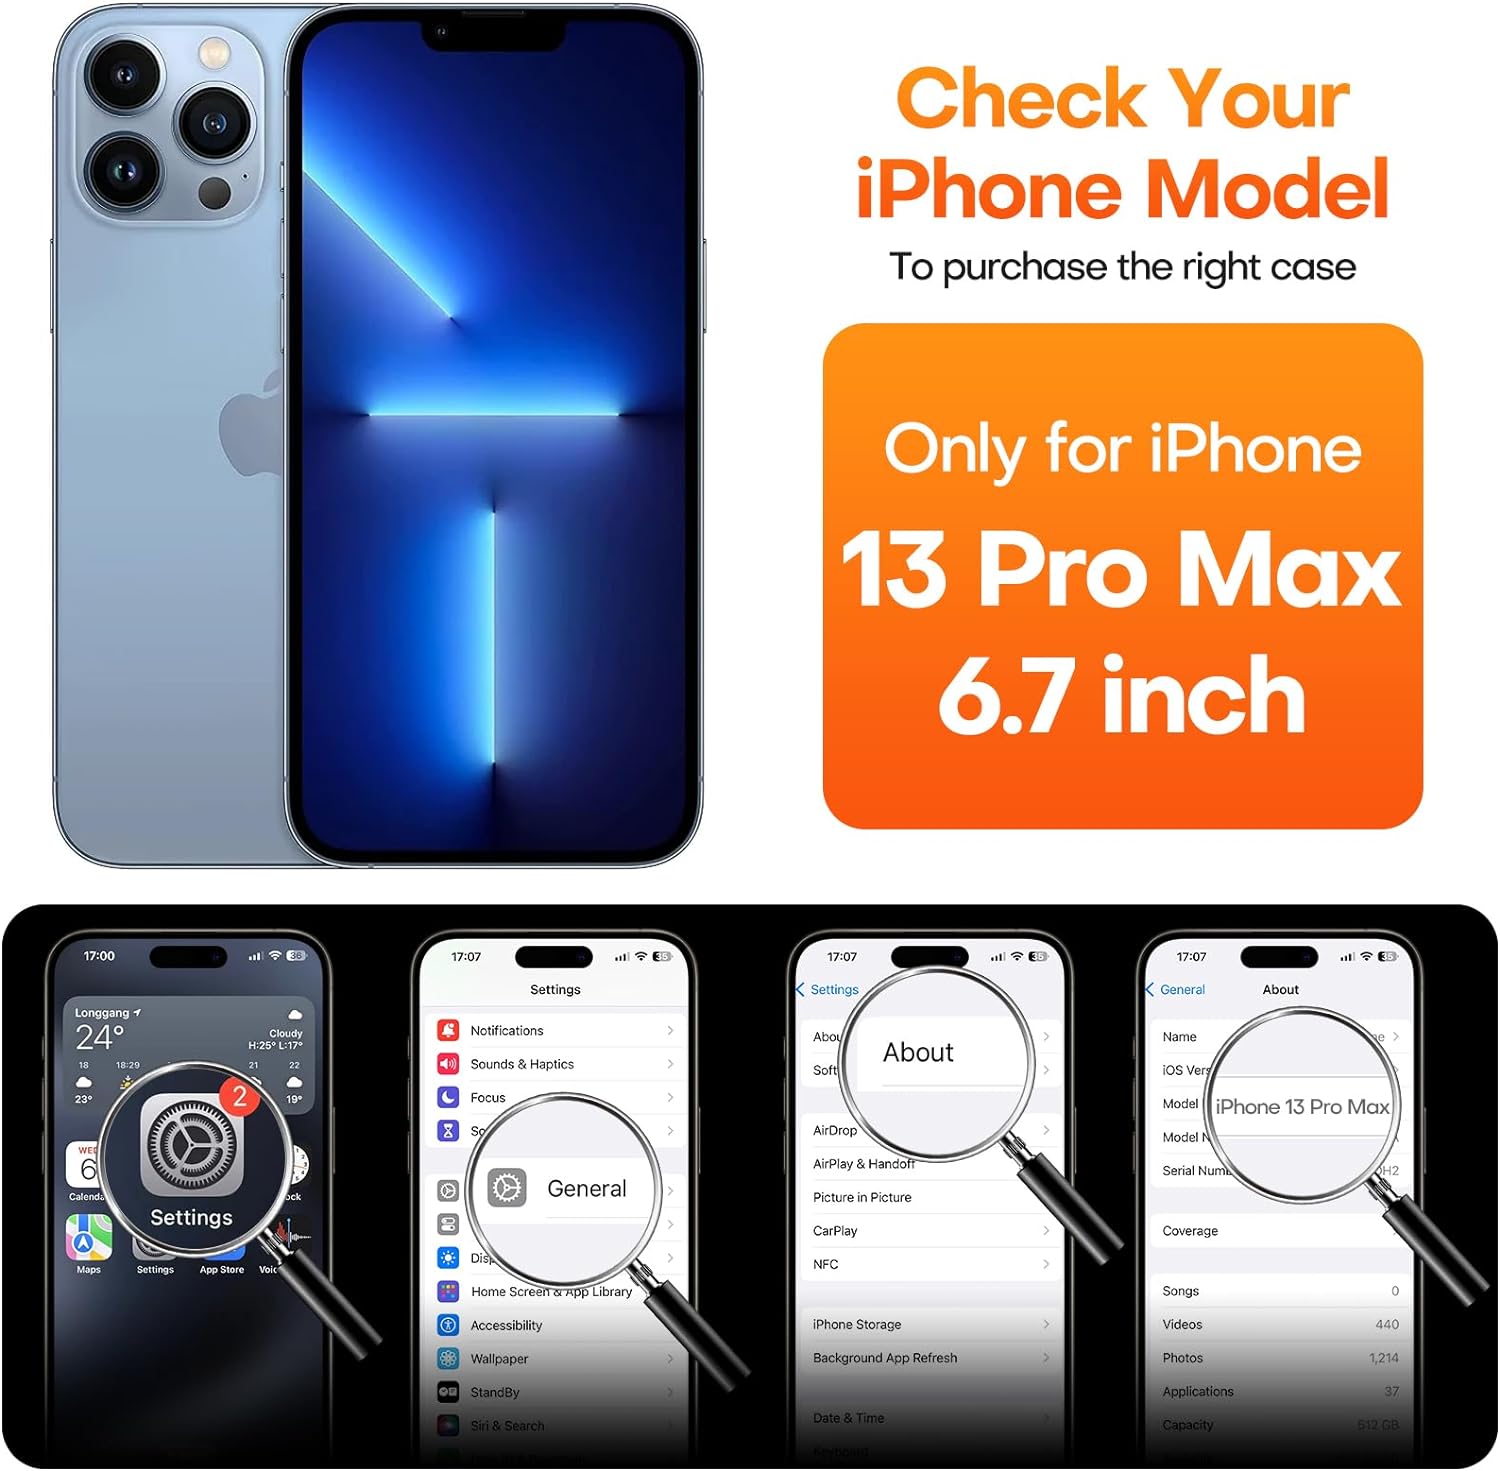 ImpactStrong Compatible with iPhone 13 Pro Max Clear Back Case, Shock Absorbing Scratch-Resistant Hybrid Clear TPU Cover Designed for iPhone 13 Pro Max Only - Black